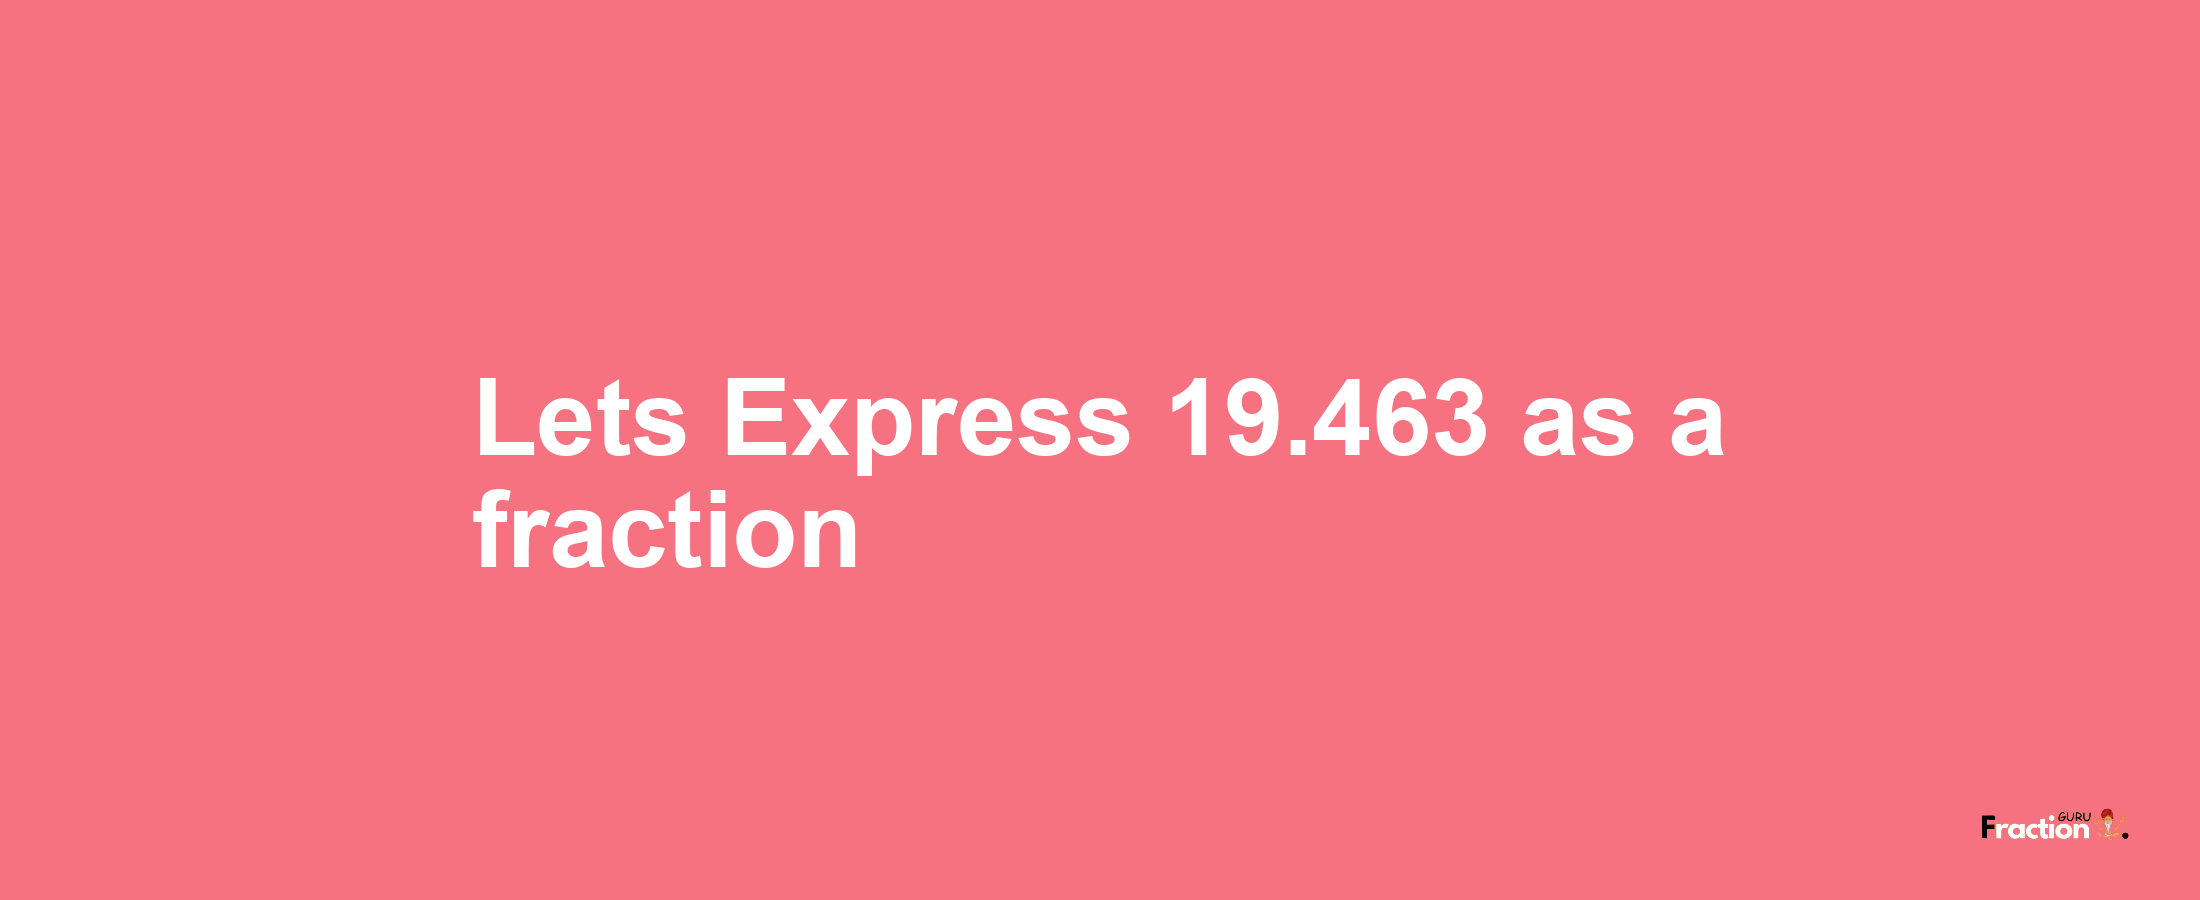 Lets Express 19.463 as afraction